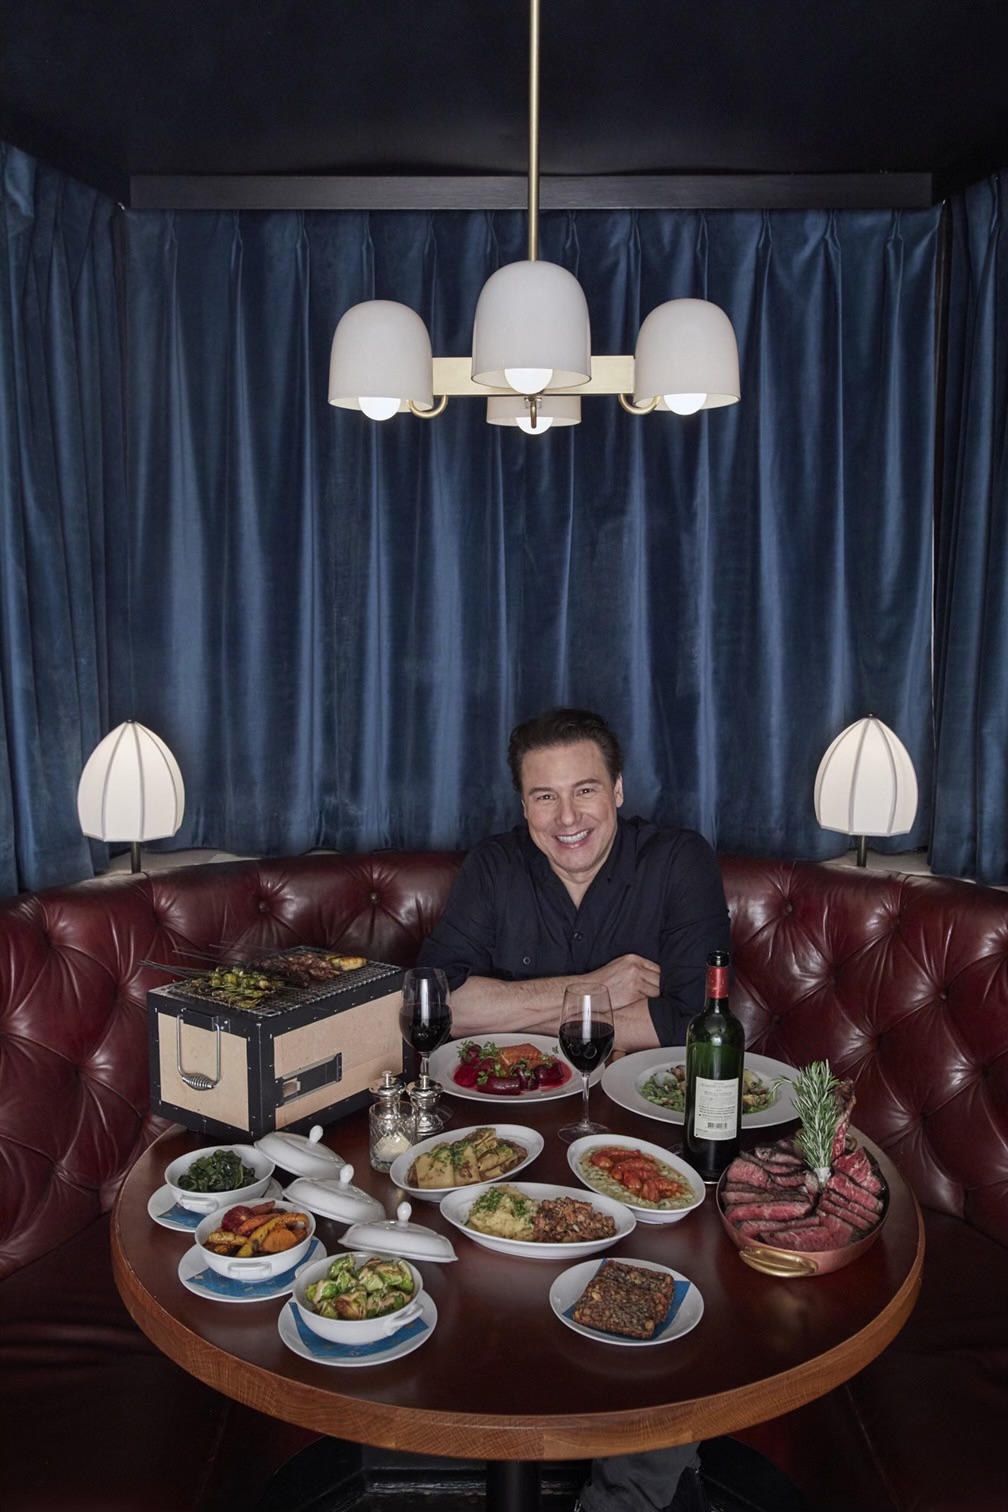 Rocco DiSpirito seated at a table with plates